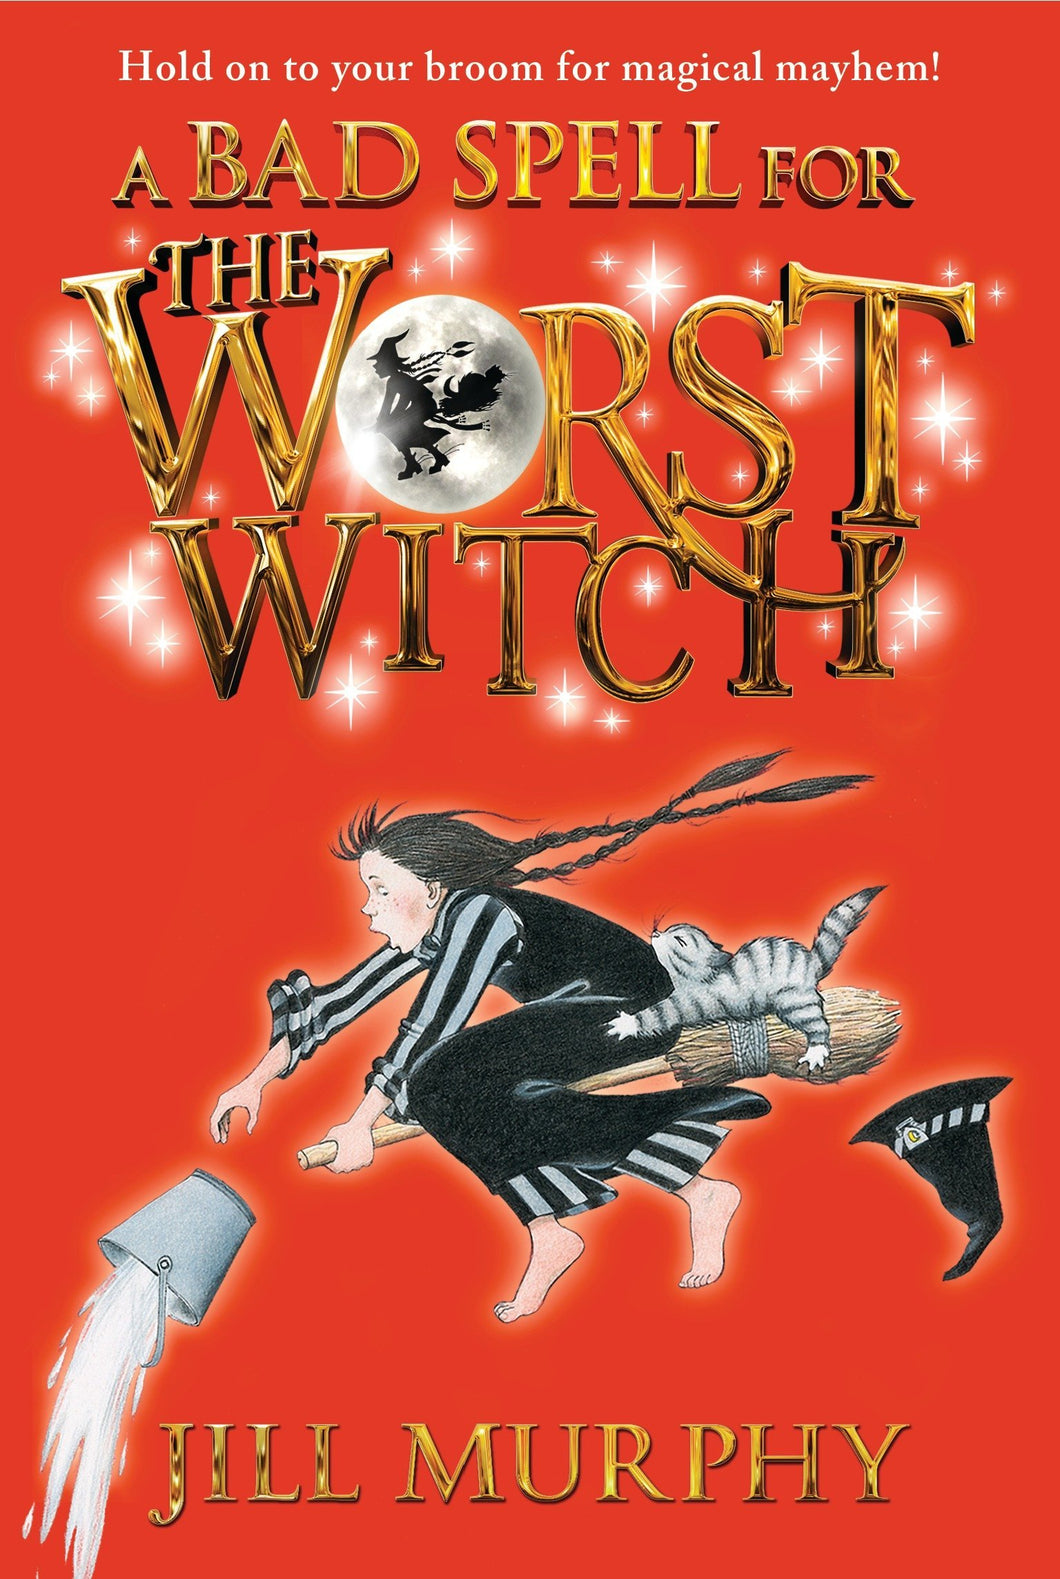 A Bad Spell for The Worst Witch (#3)